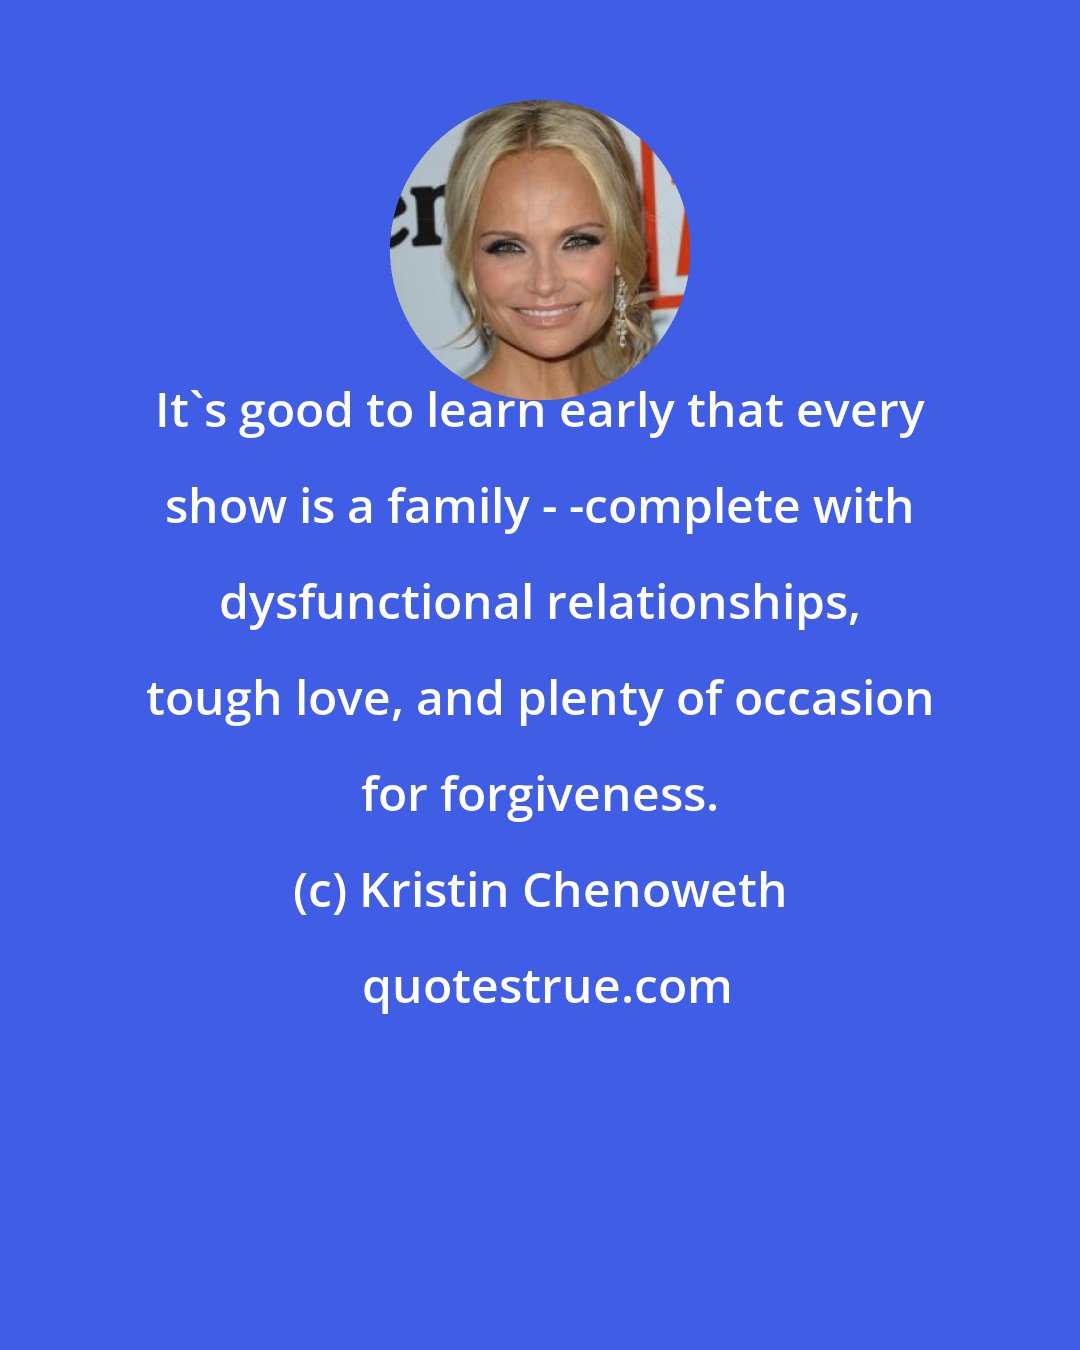 Kristin Chenoweth: It's good to learn early that every show is a family - -complete with dysfunctional relationships, tough love, and plenty of occasion for forgiveness.